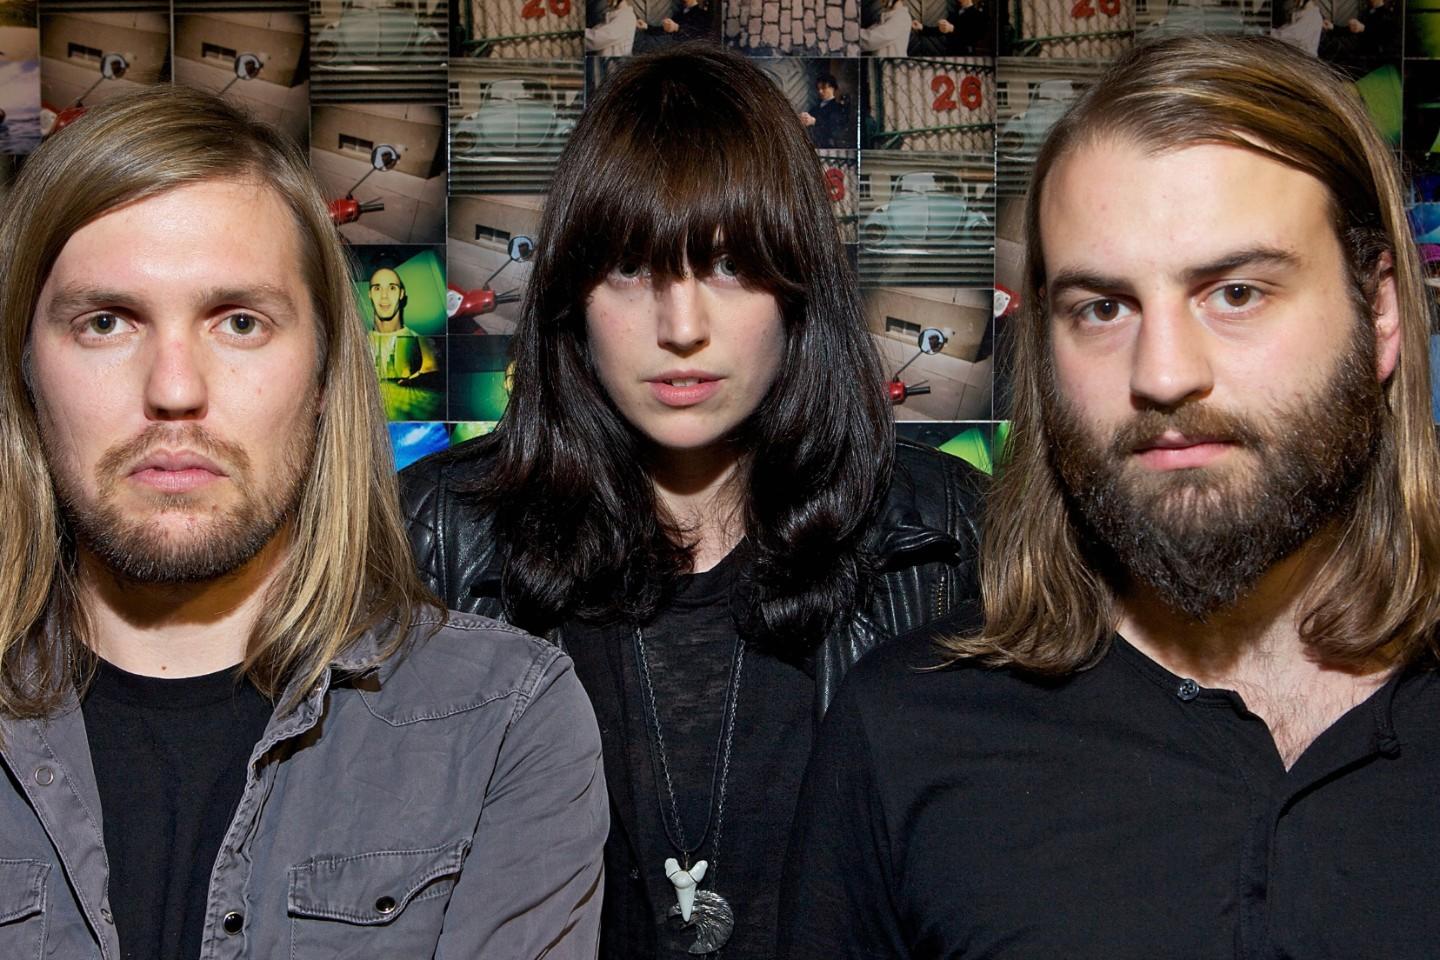 Band of Skulls Tickets | Band of Skulls Tour and Concert Tickets - viagogo1440 x 960